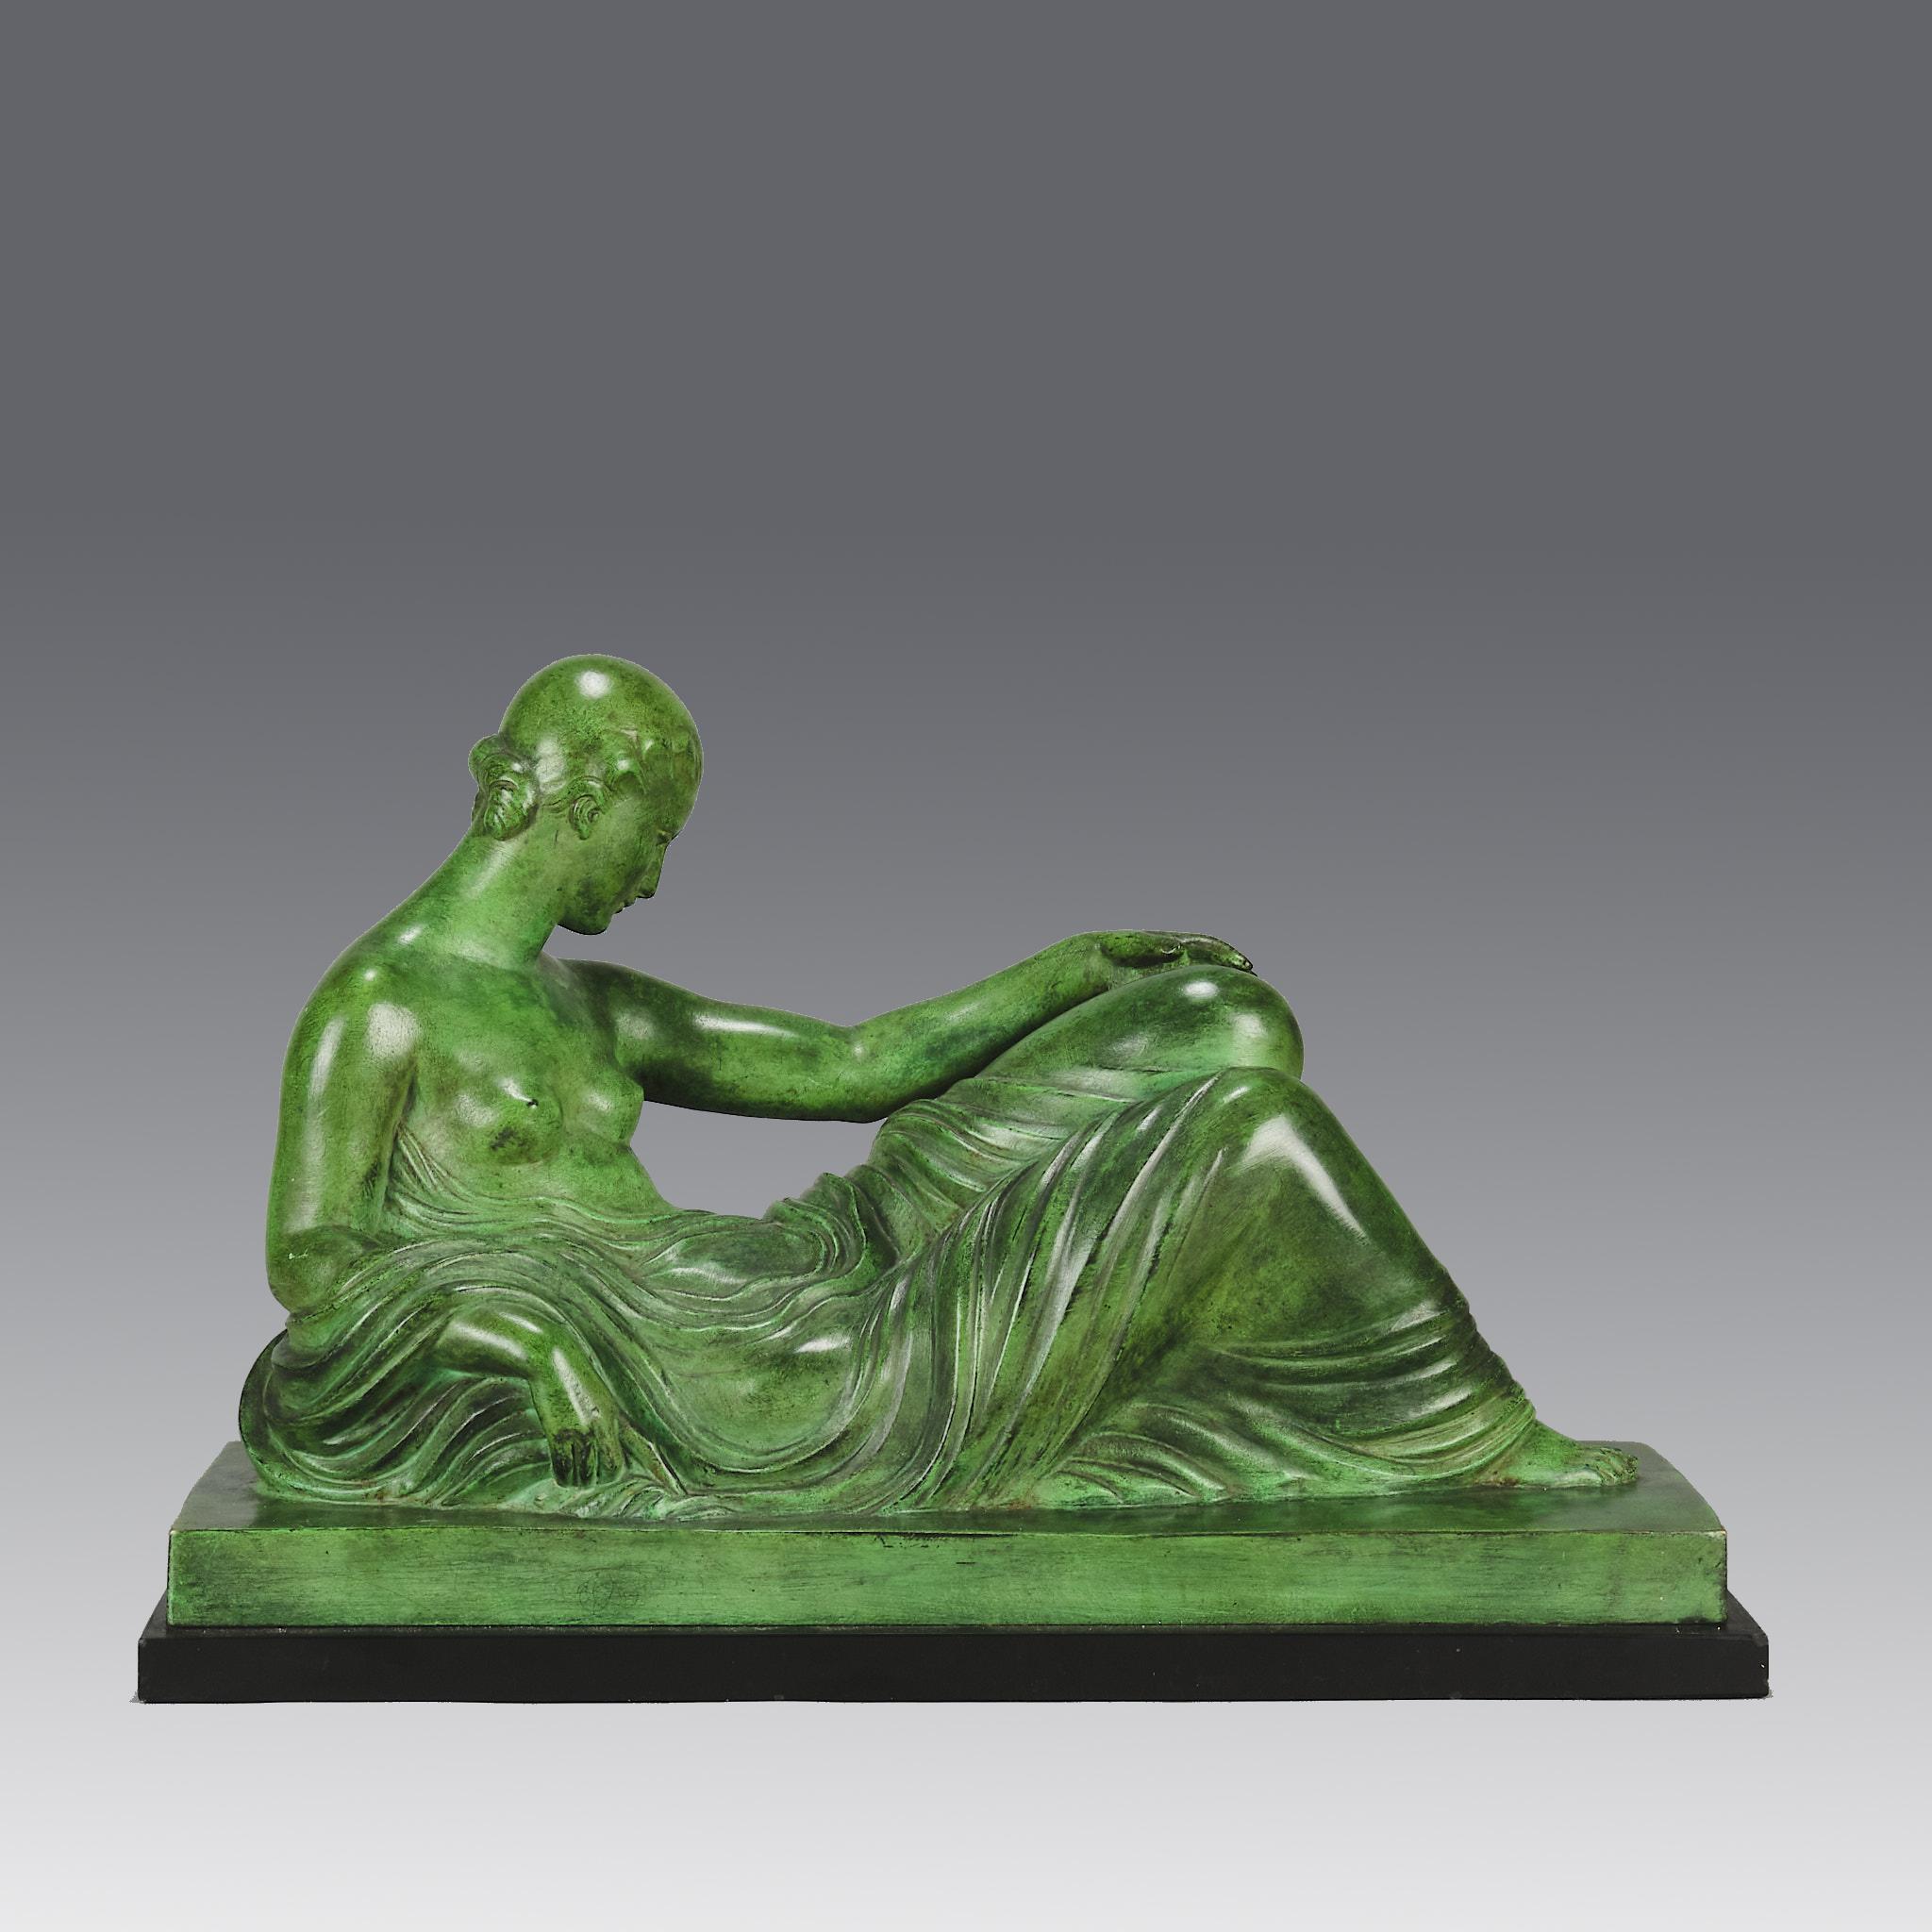 An attractive early 20th century French Art Deco bronze figure of a resting beauty reclining on a daybed with a shawl delicately draped over her. The bronze exhibiting attractive deep green patination and very fine hand finished surface detail,